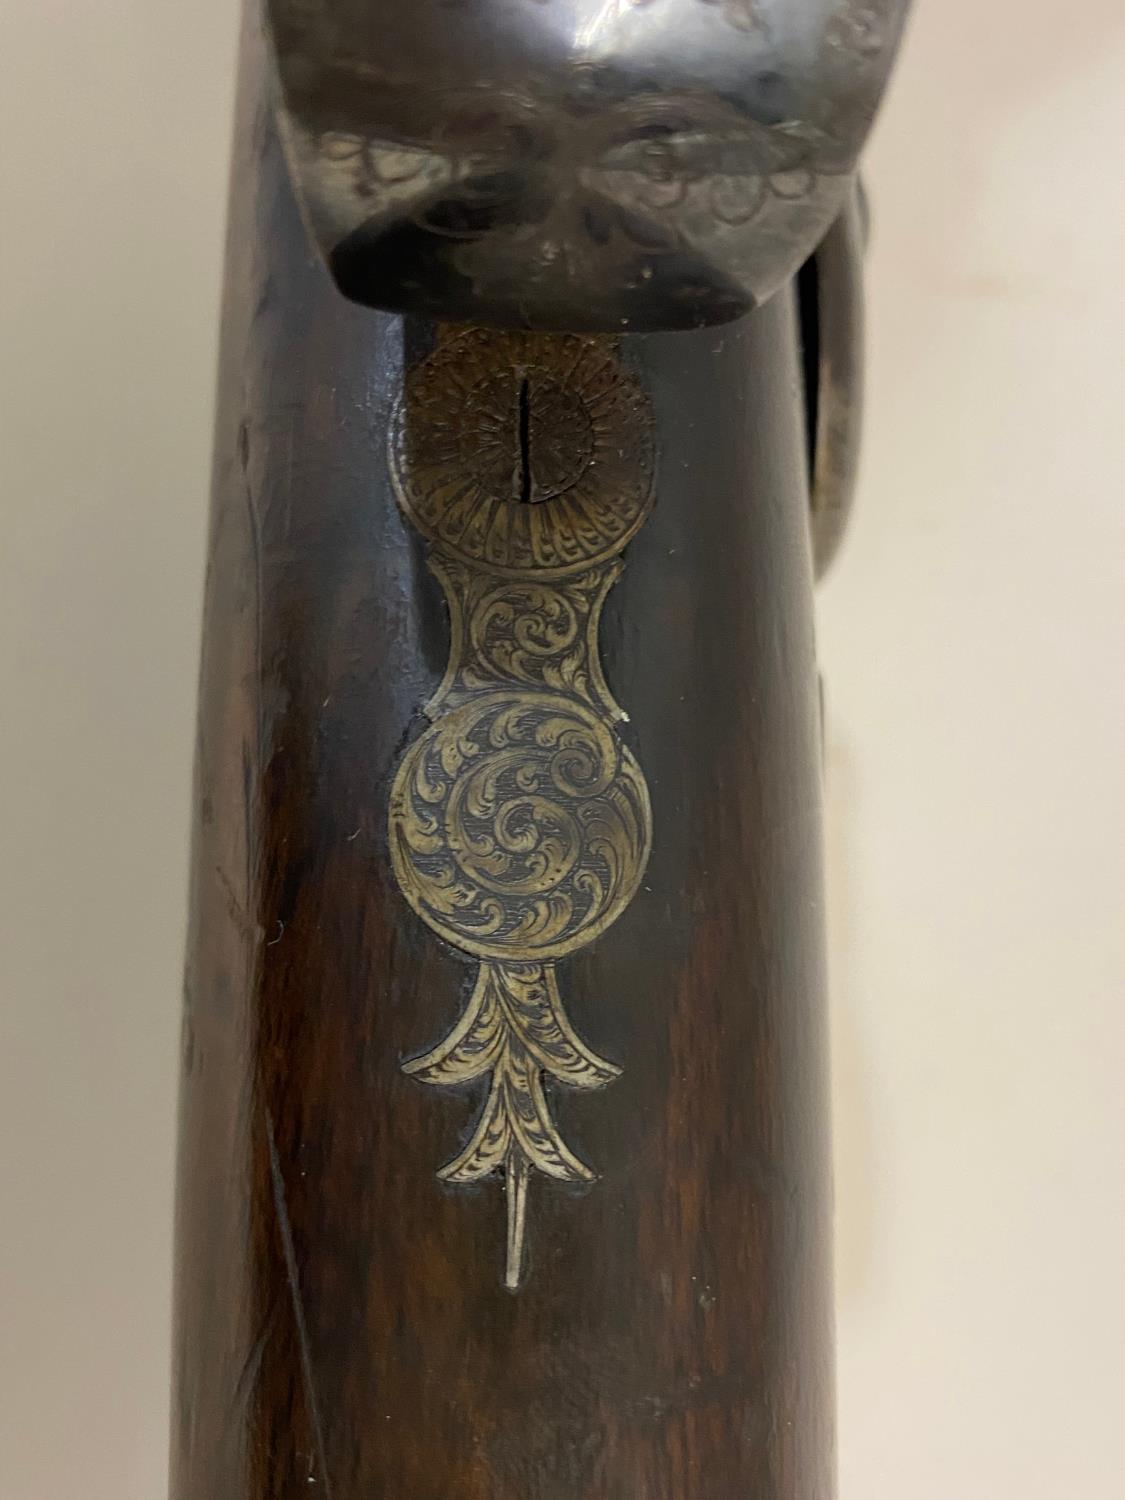 A FINE VICTORIAN SPORTING GUN BY PURDEY OF LONDON. - Image 5 of 11